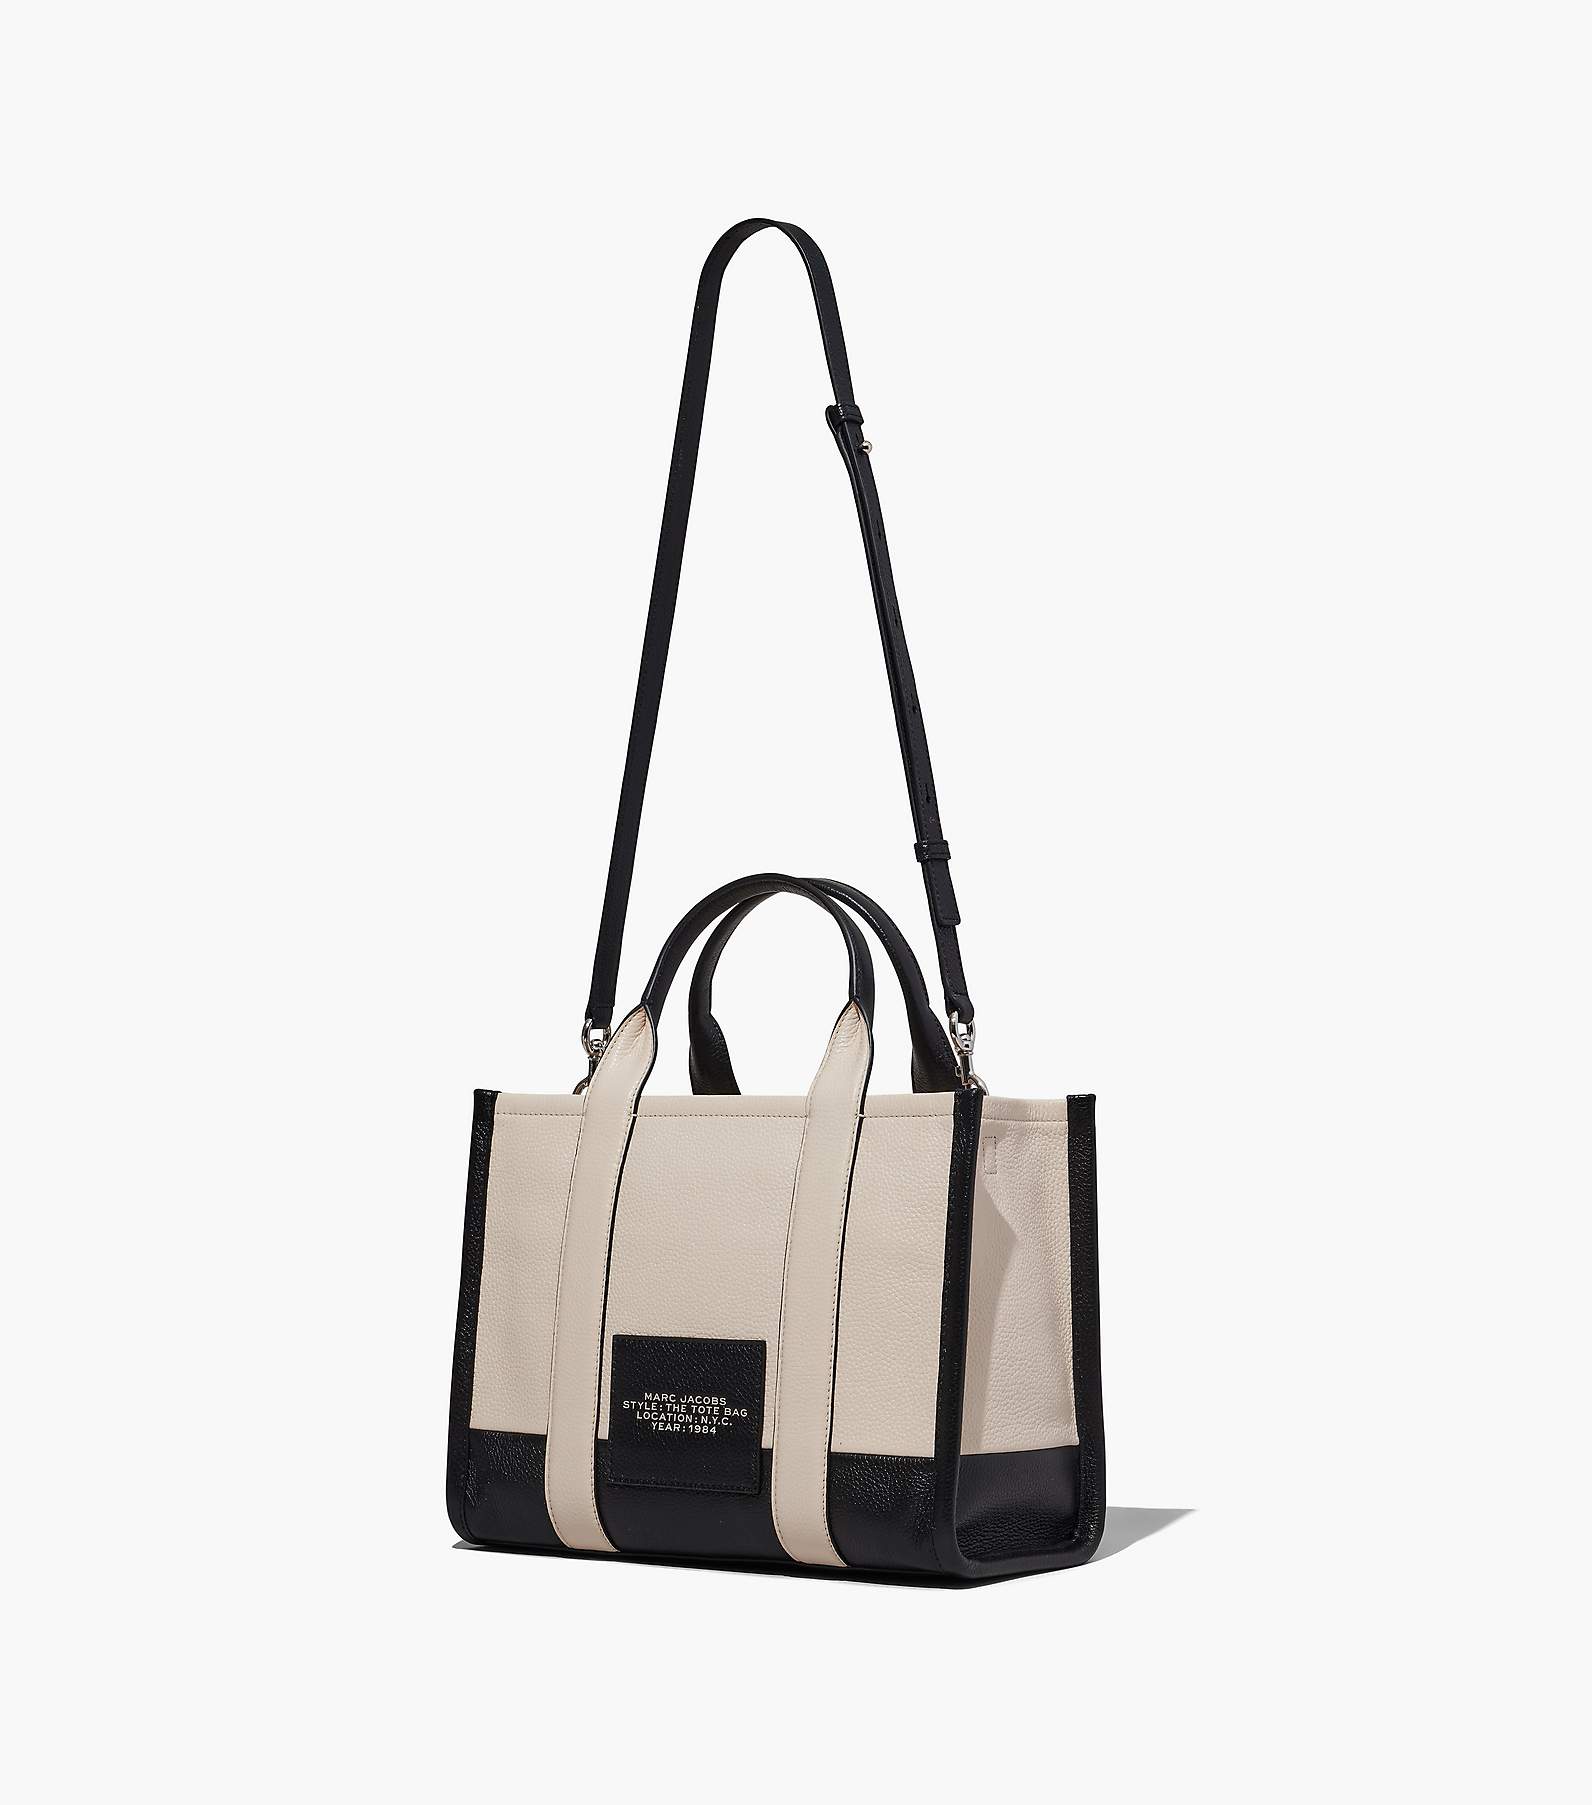 Buy MARC JACOBS The Medium Tote Bag, White Color Women